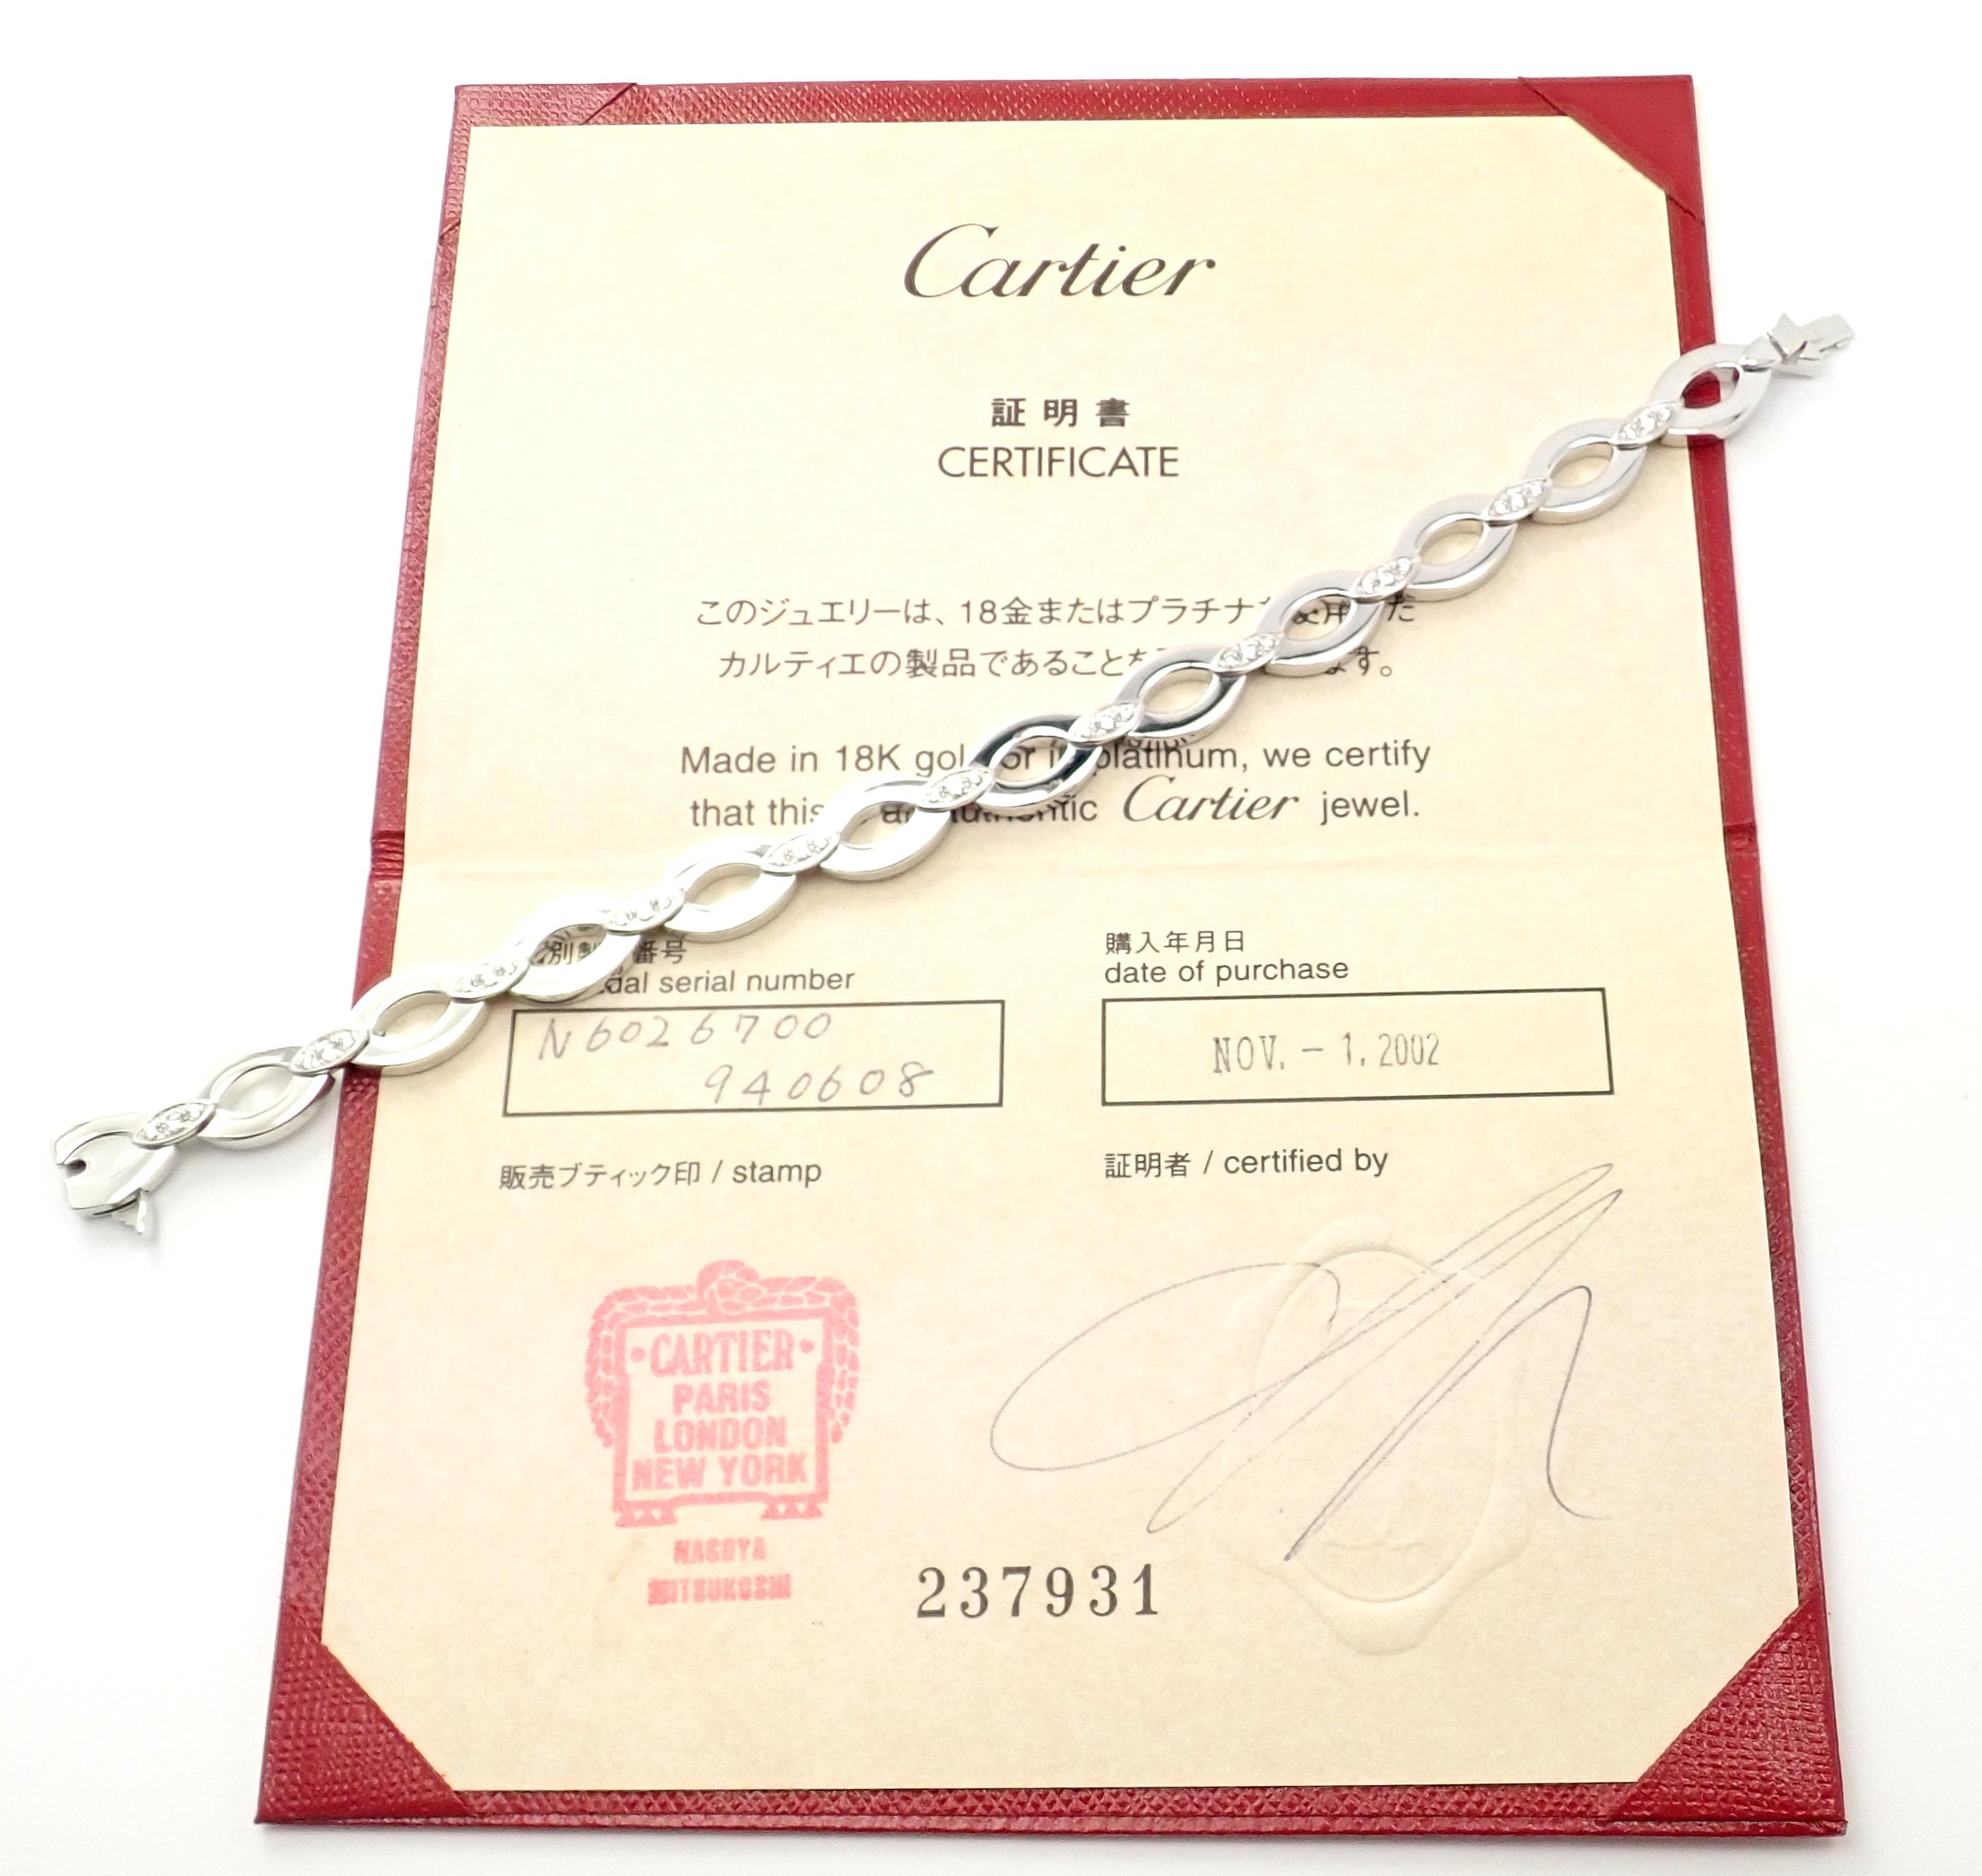 Cartier Diadea Diamond White Gold Link Bracelet In Excellent Condition For Sale In Holland, PA